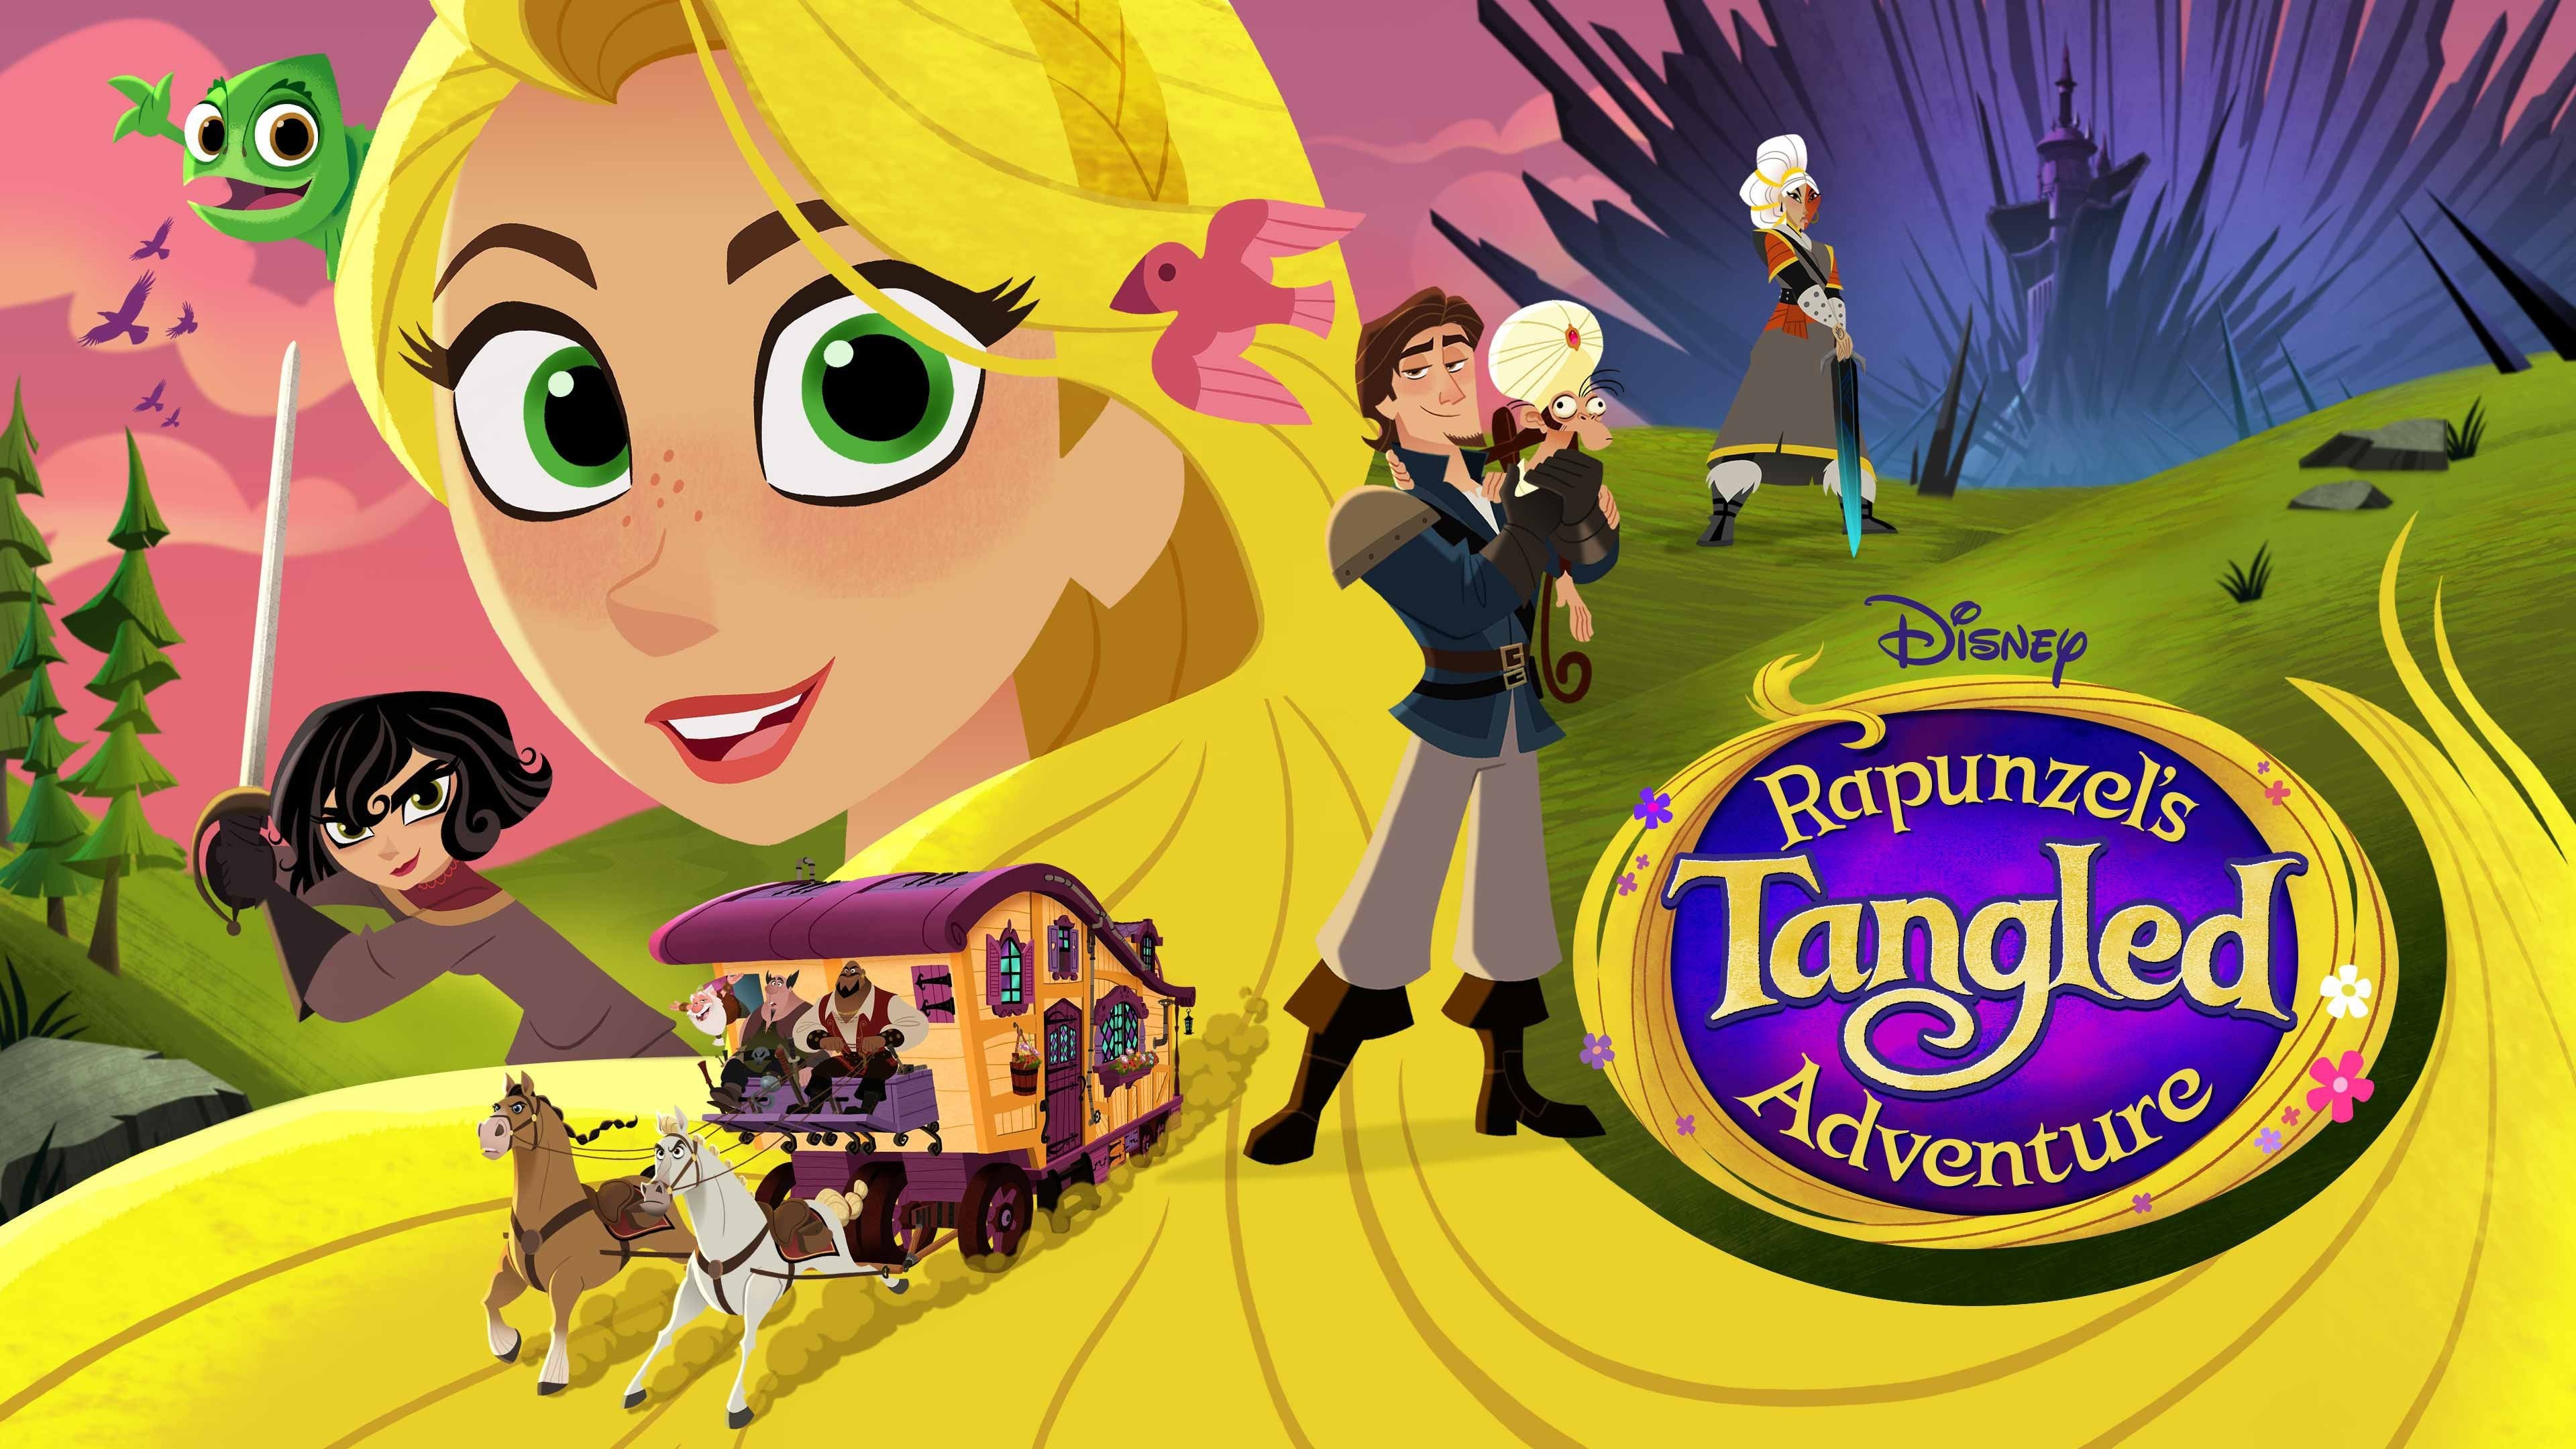 Tangled - Rotten Tomatoes